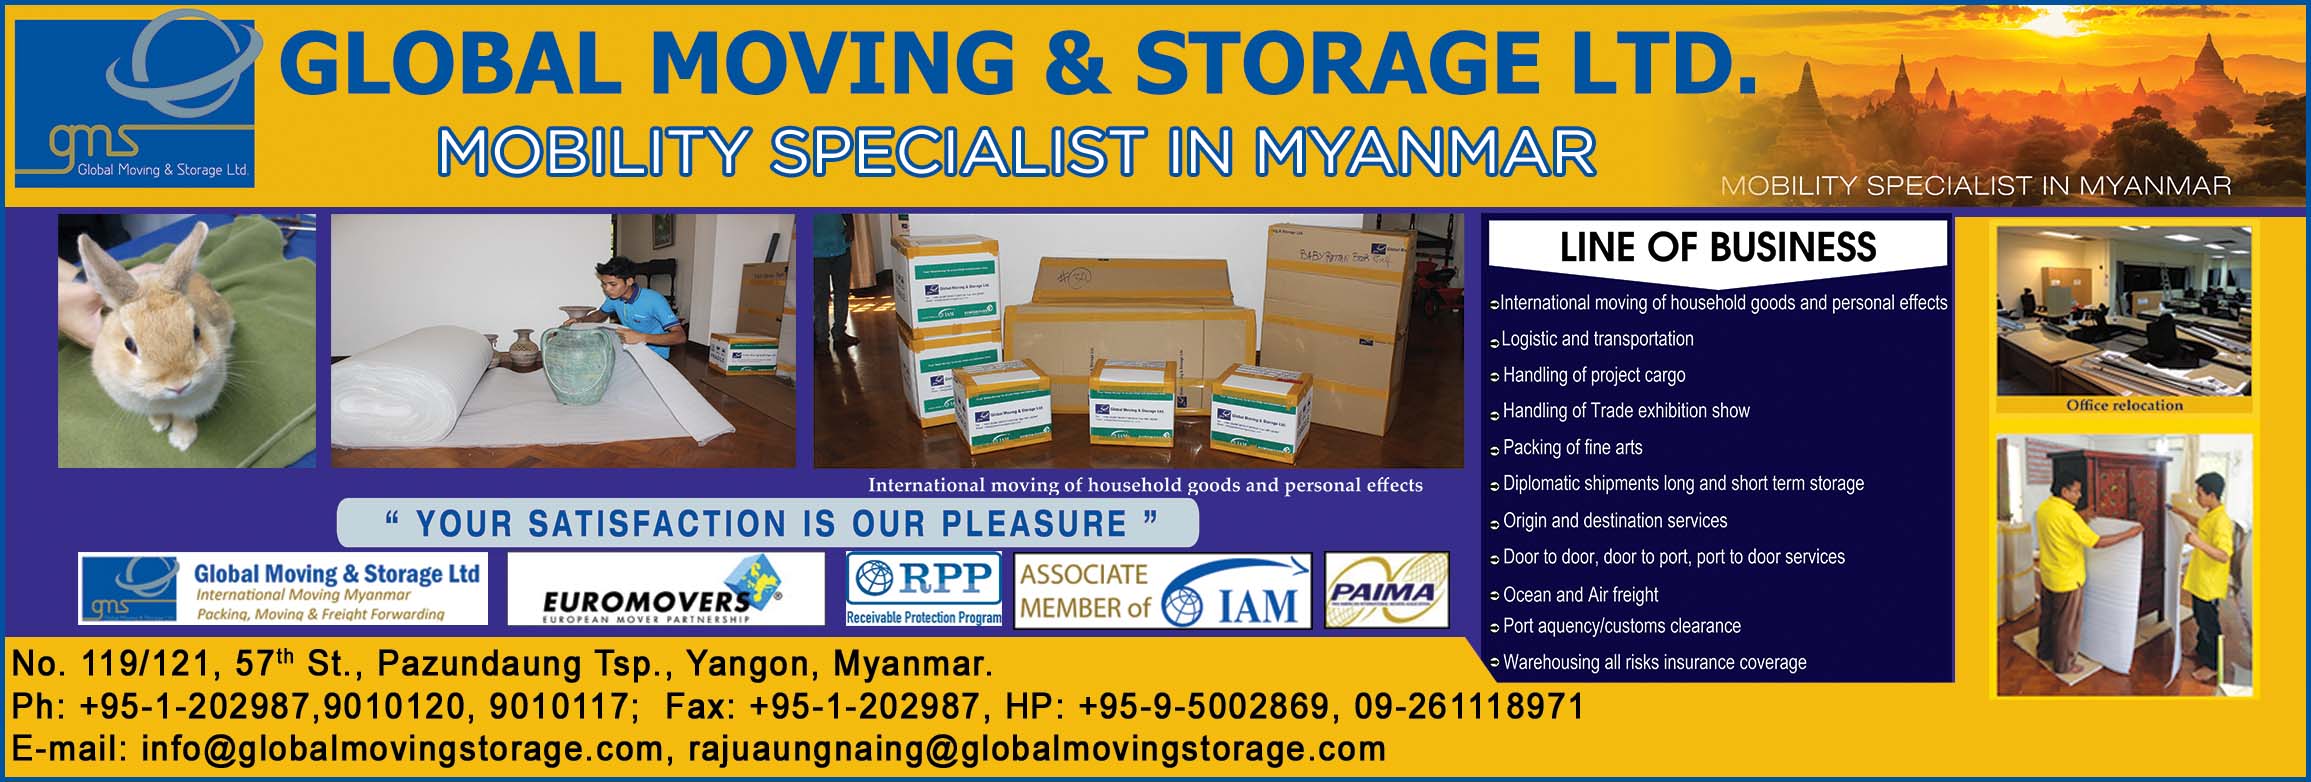 Global Moving and Storage Ltd.